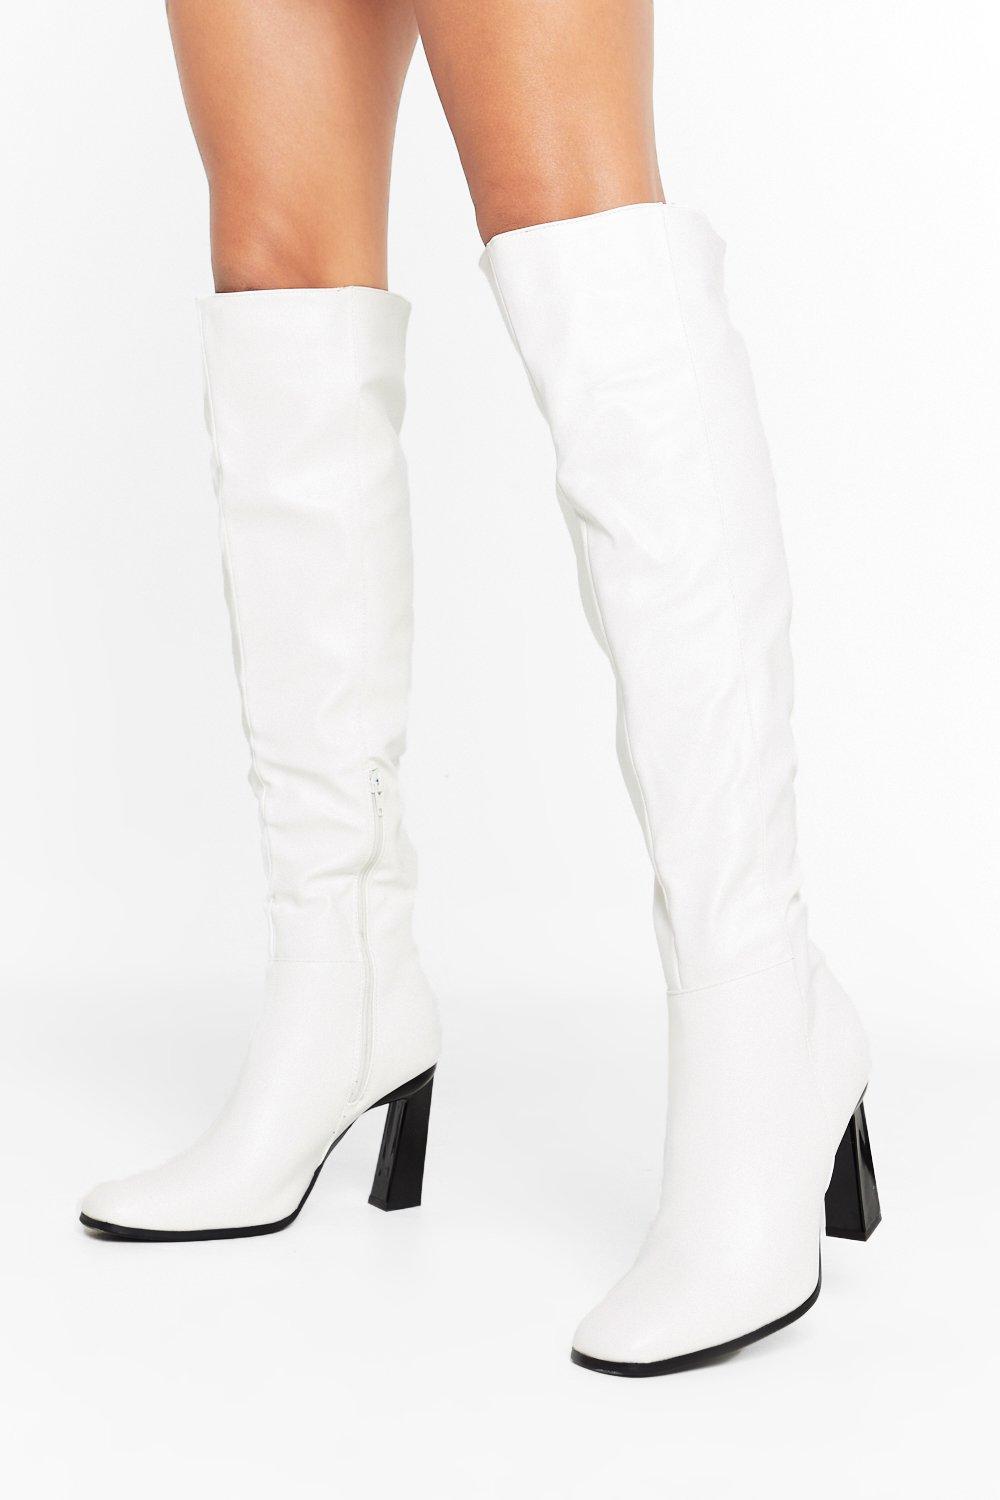 white high boots